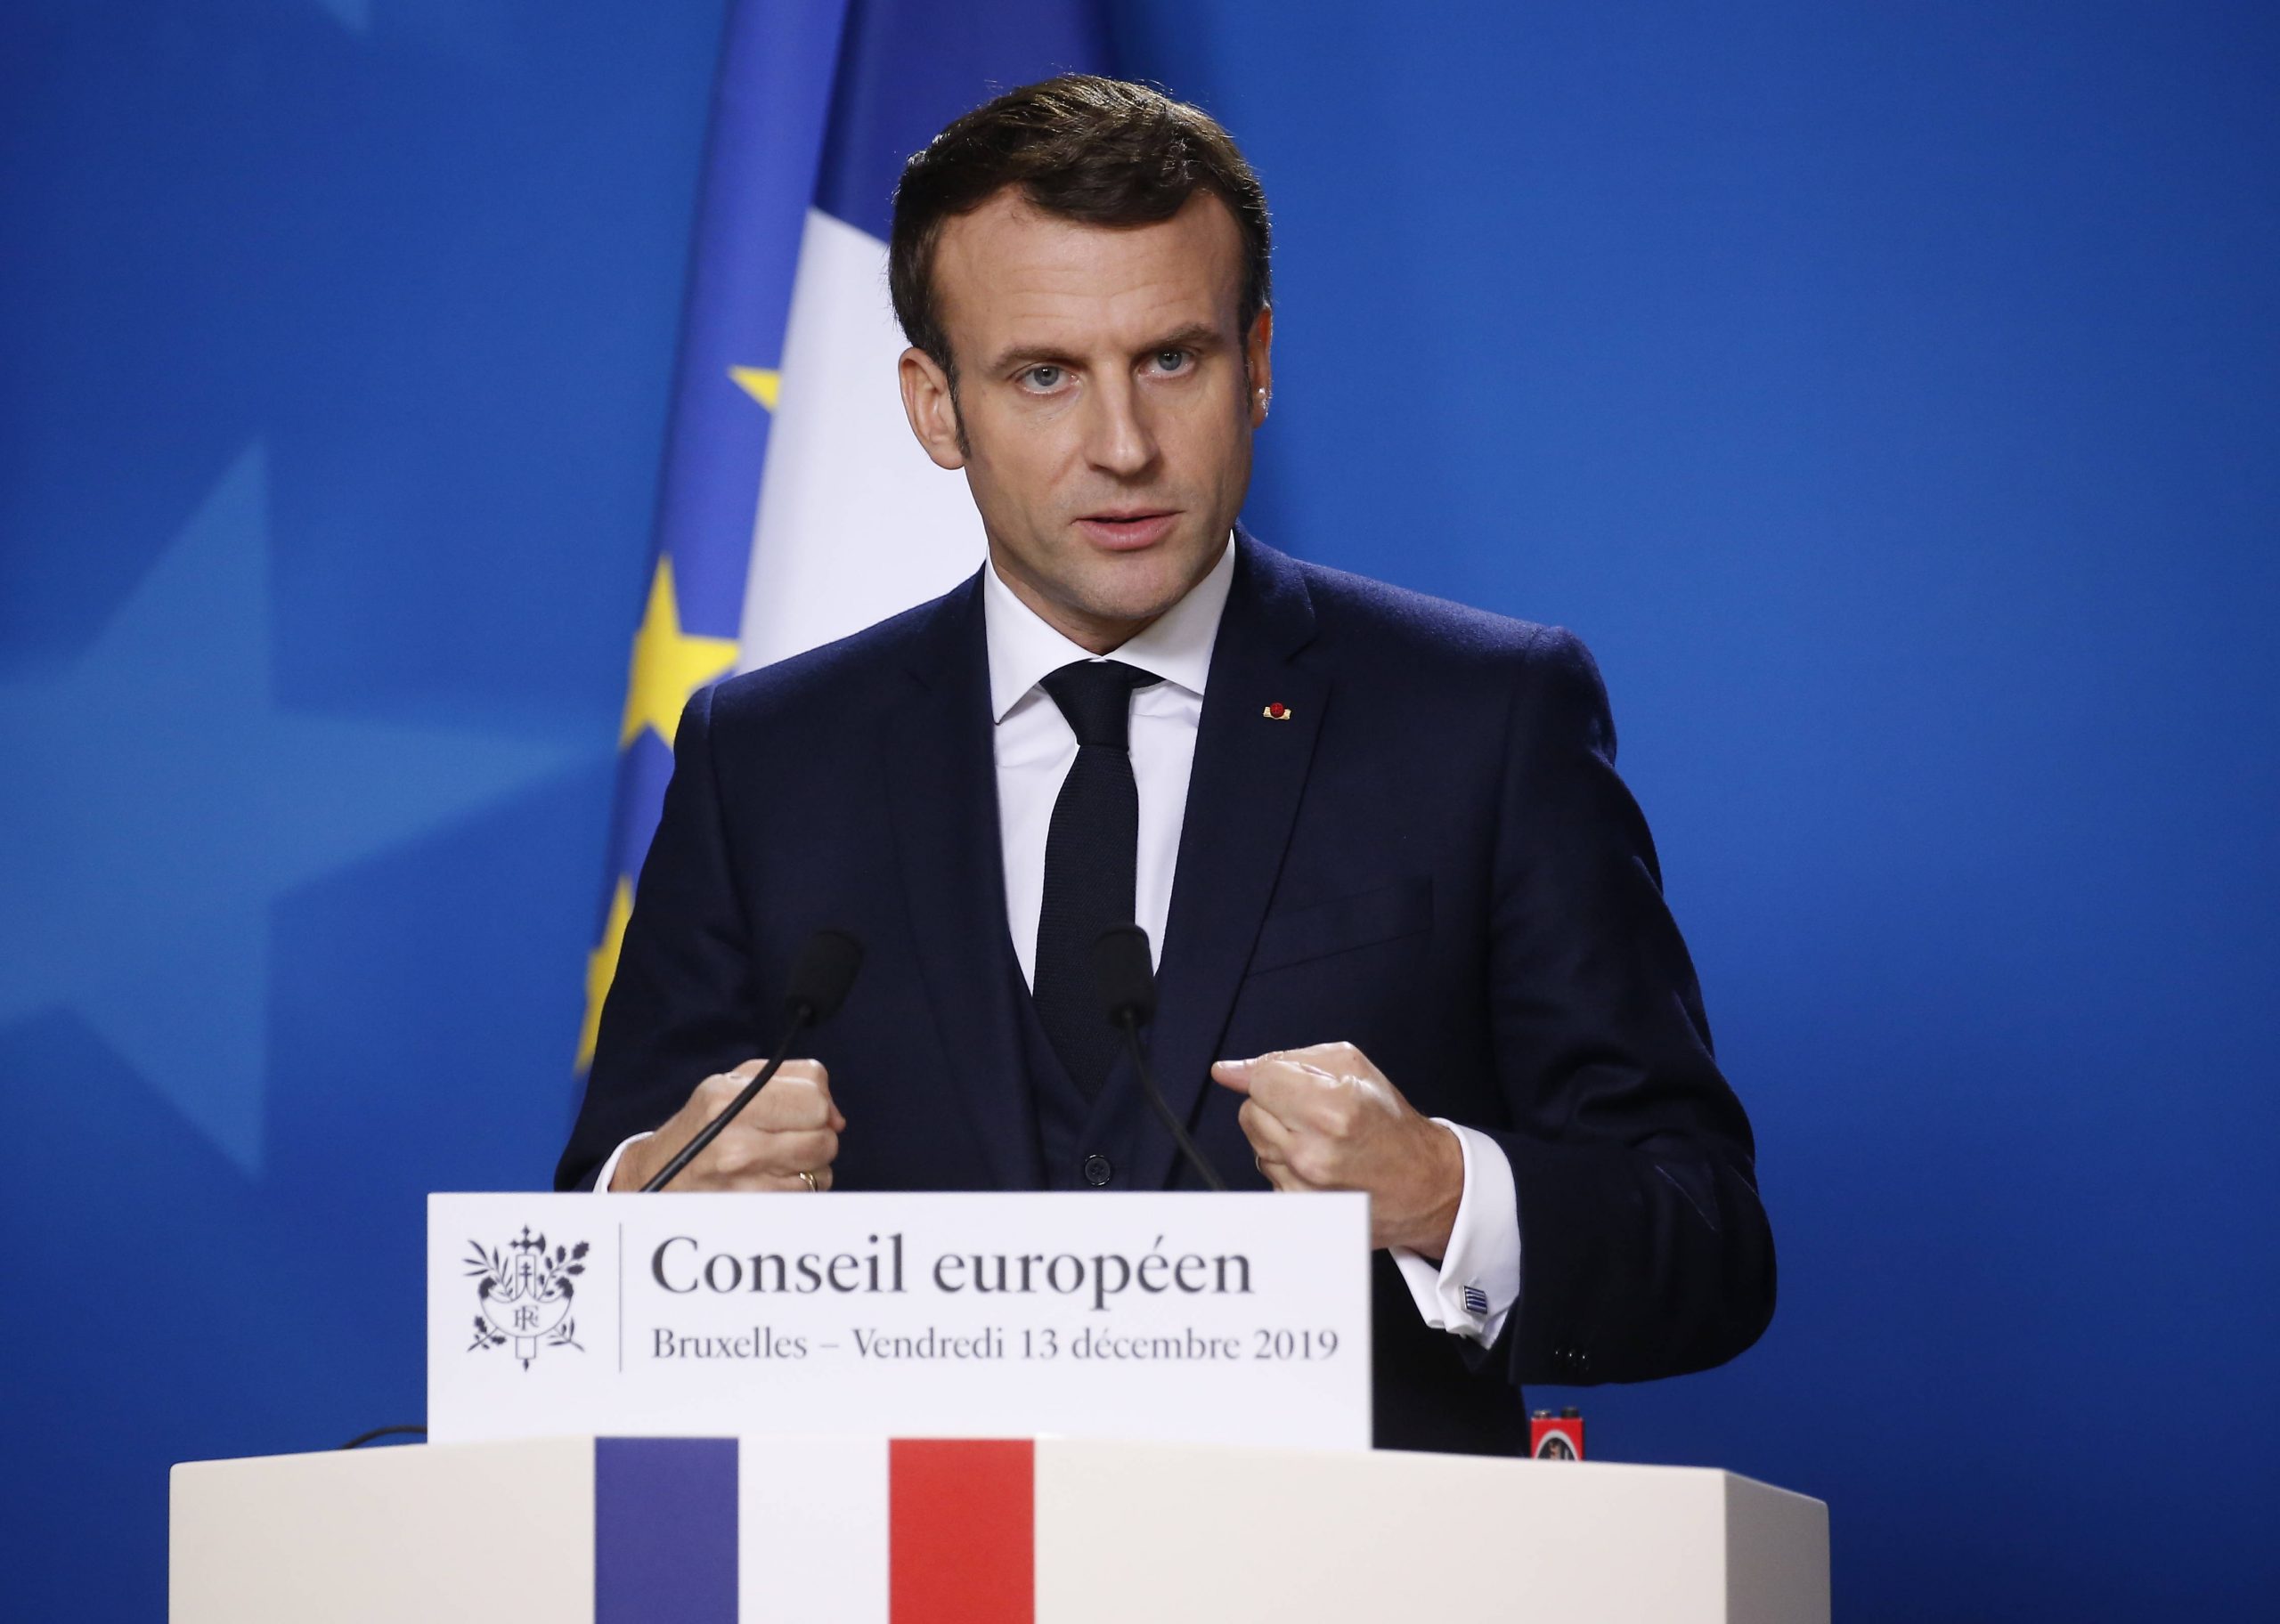 The French Vision of Europe’s Future